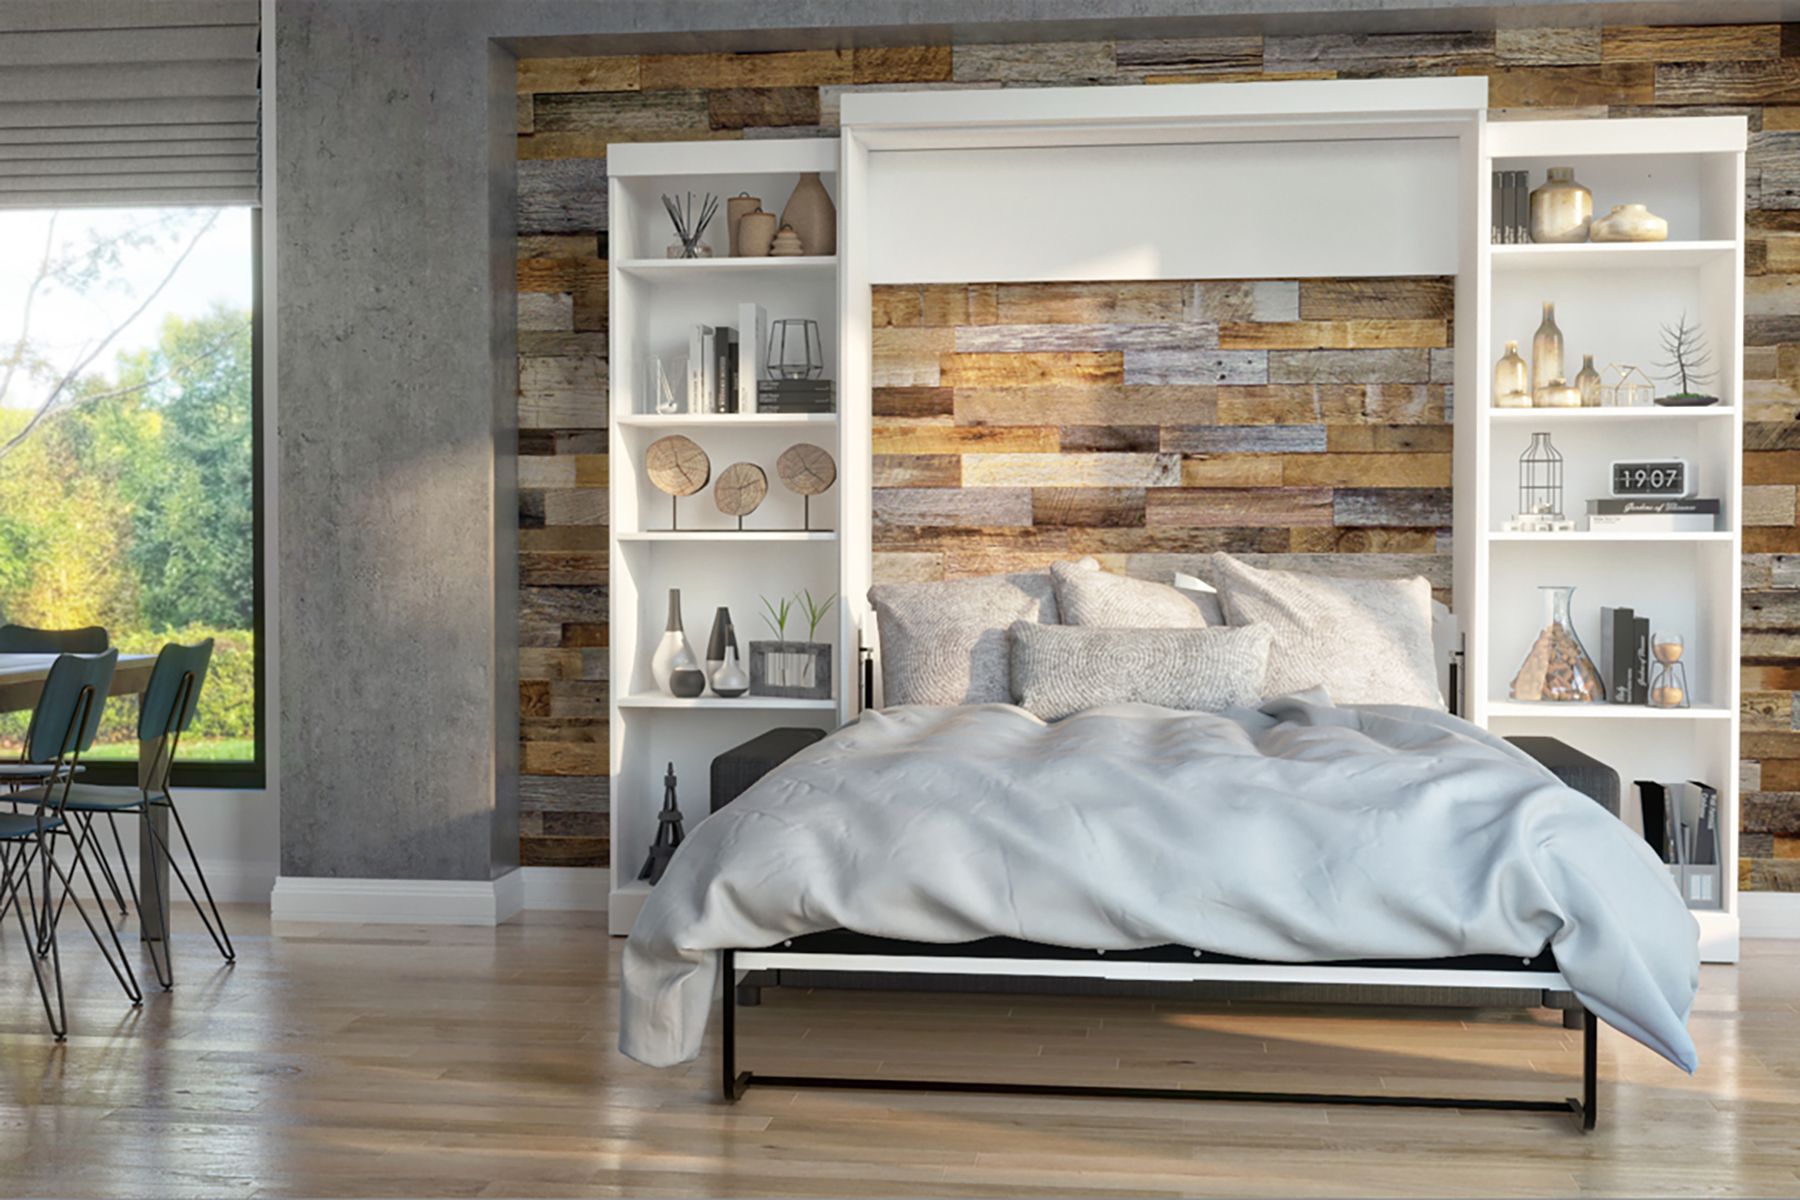 5 creative murphy bed ideas for your bedroom - this old house